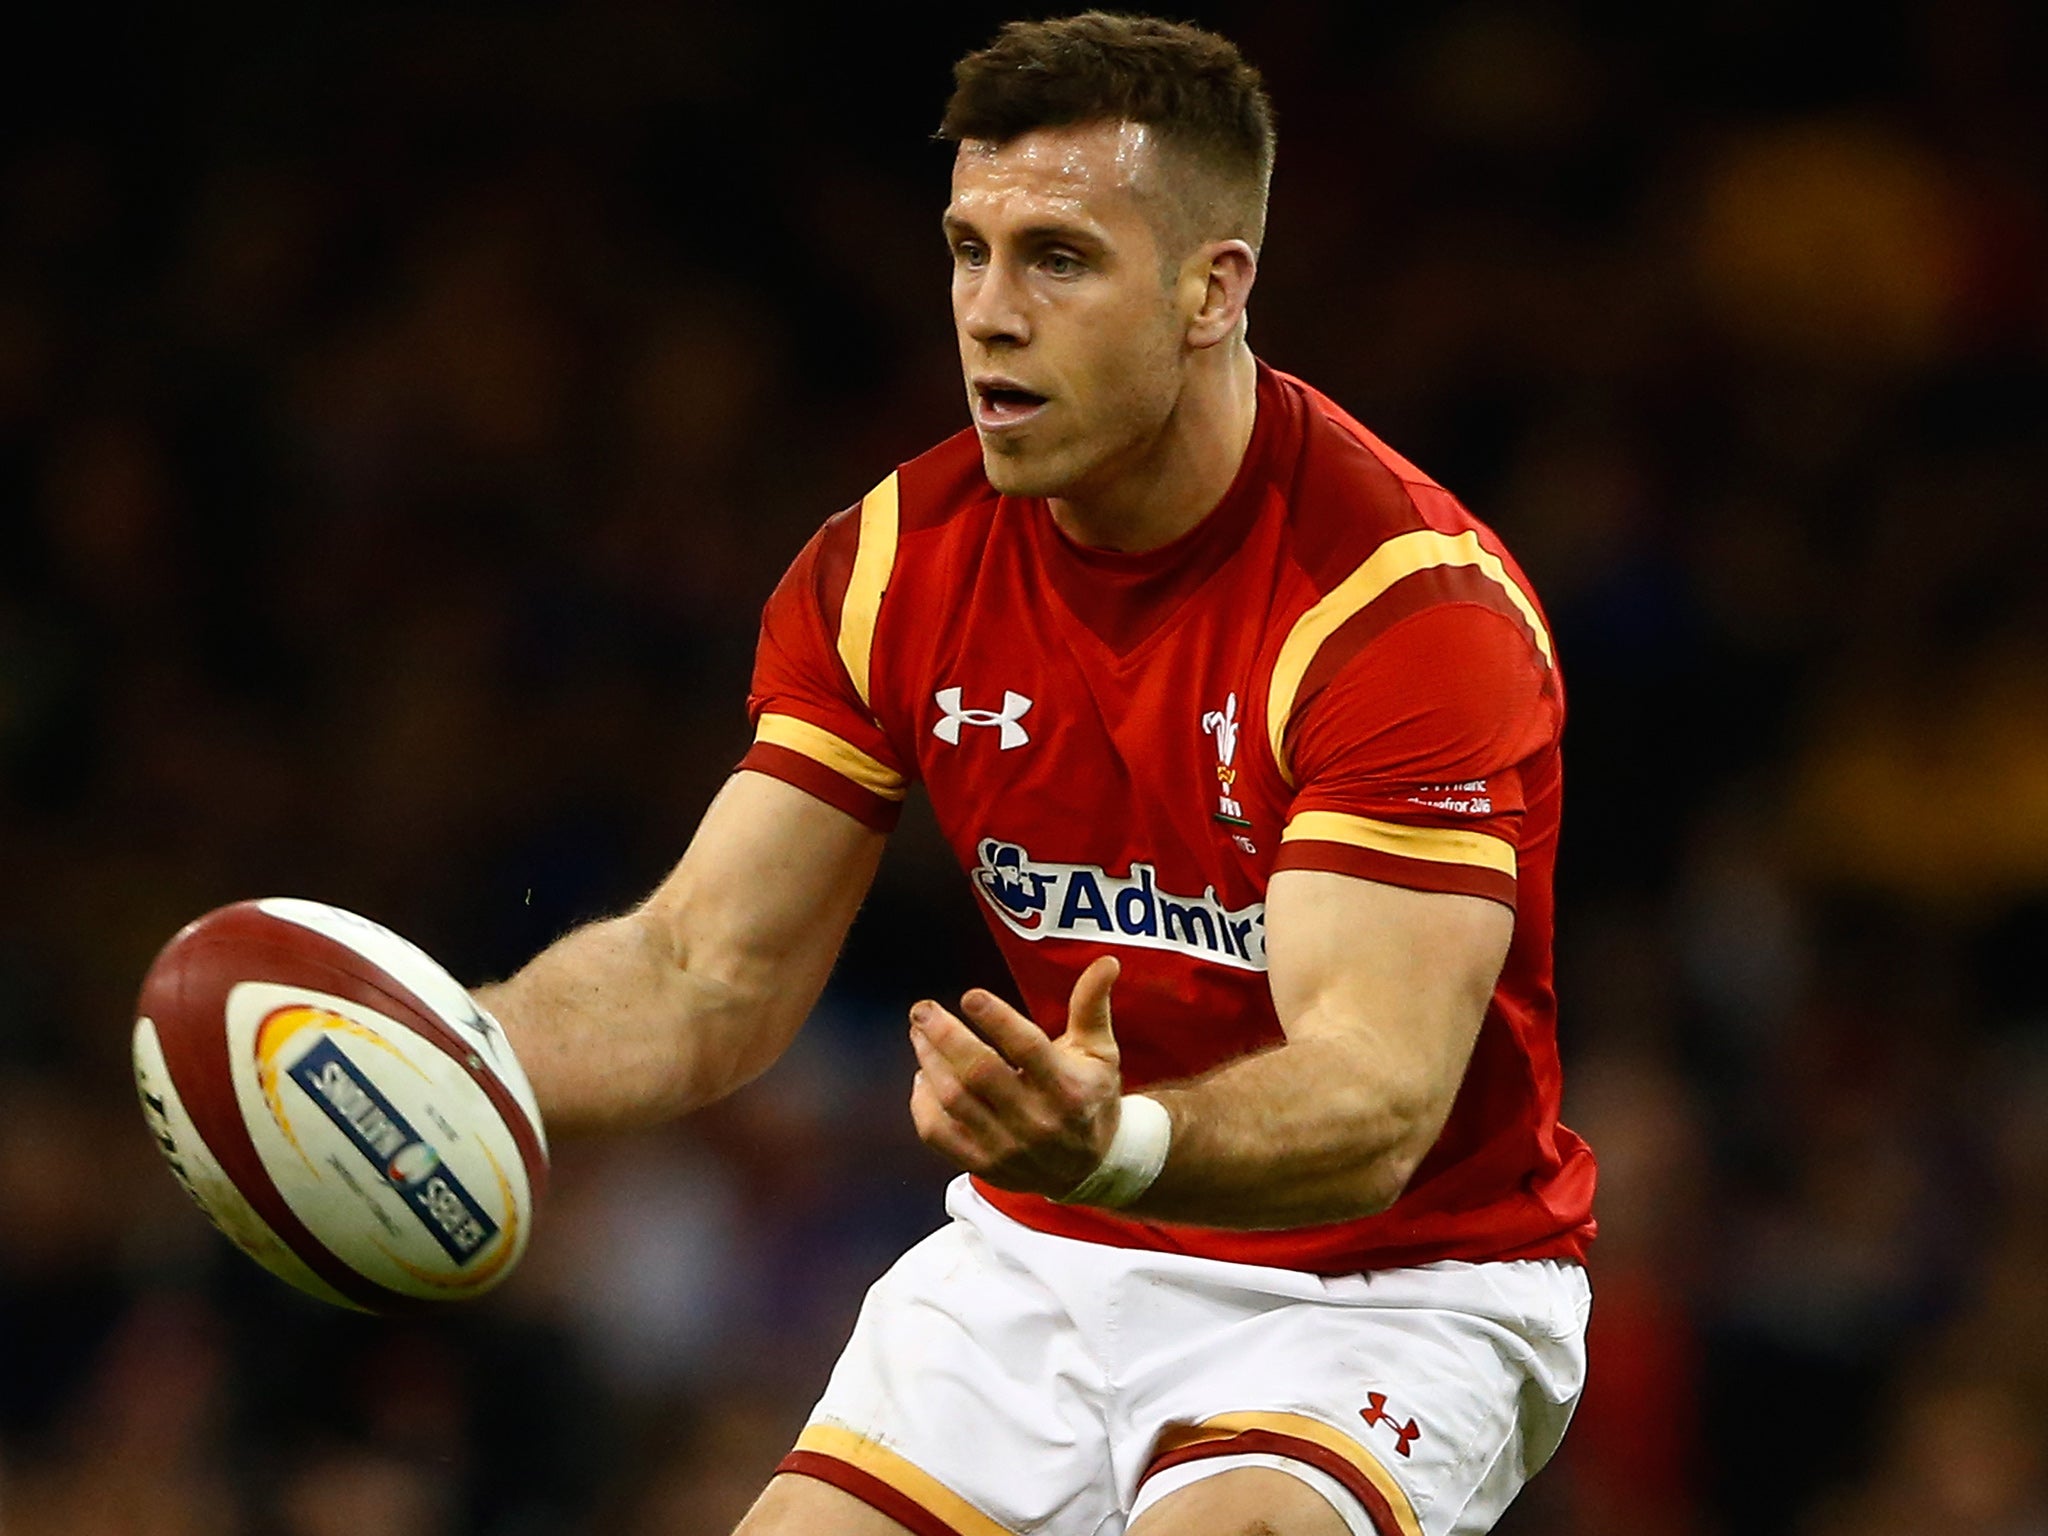 Gareth Davies scored the try at Twickenham last year that turned the World Cup game for Wales